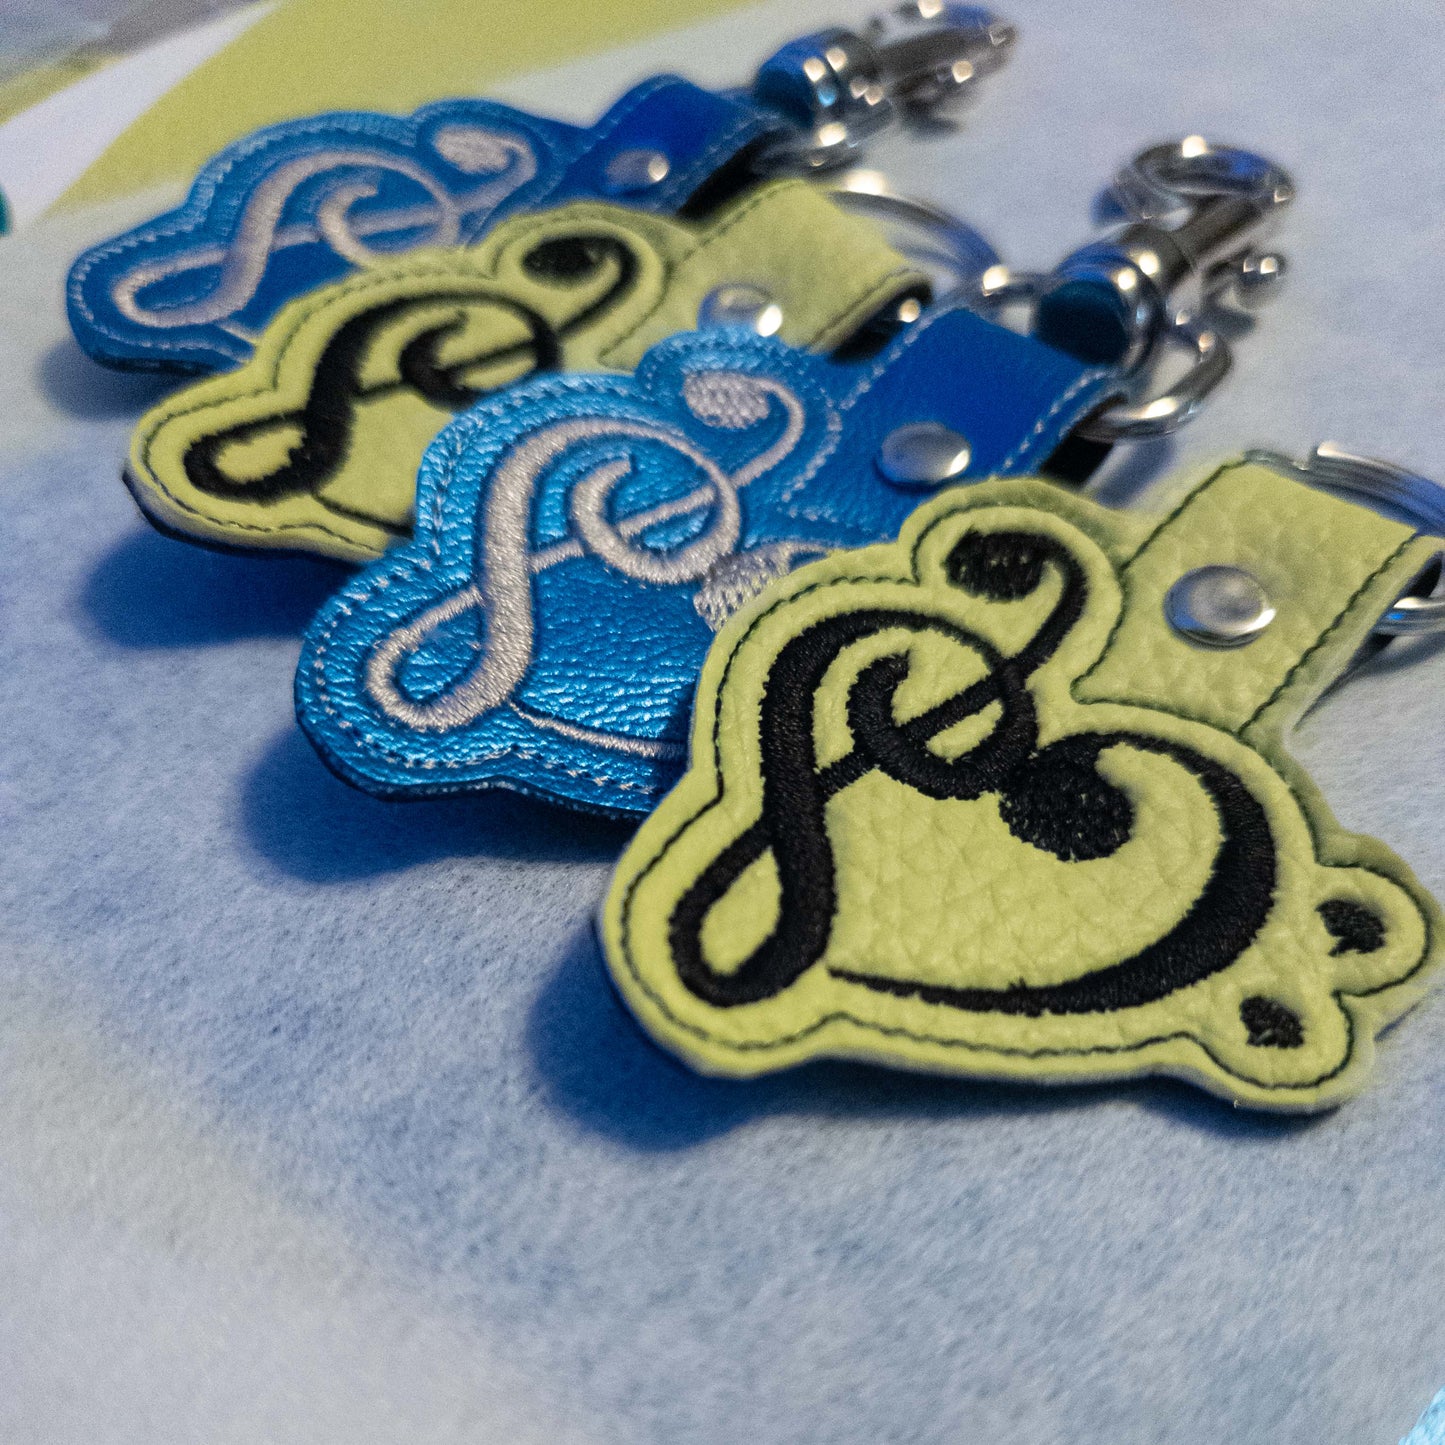 Treble and Bass Clef heart key chain for Music Lovers